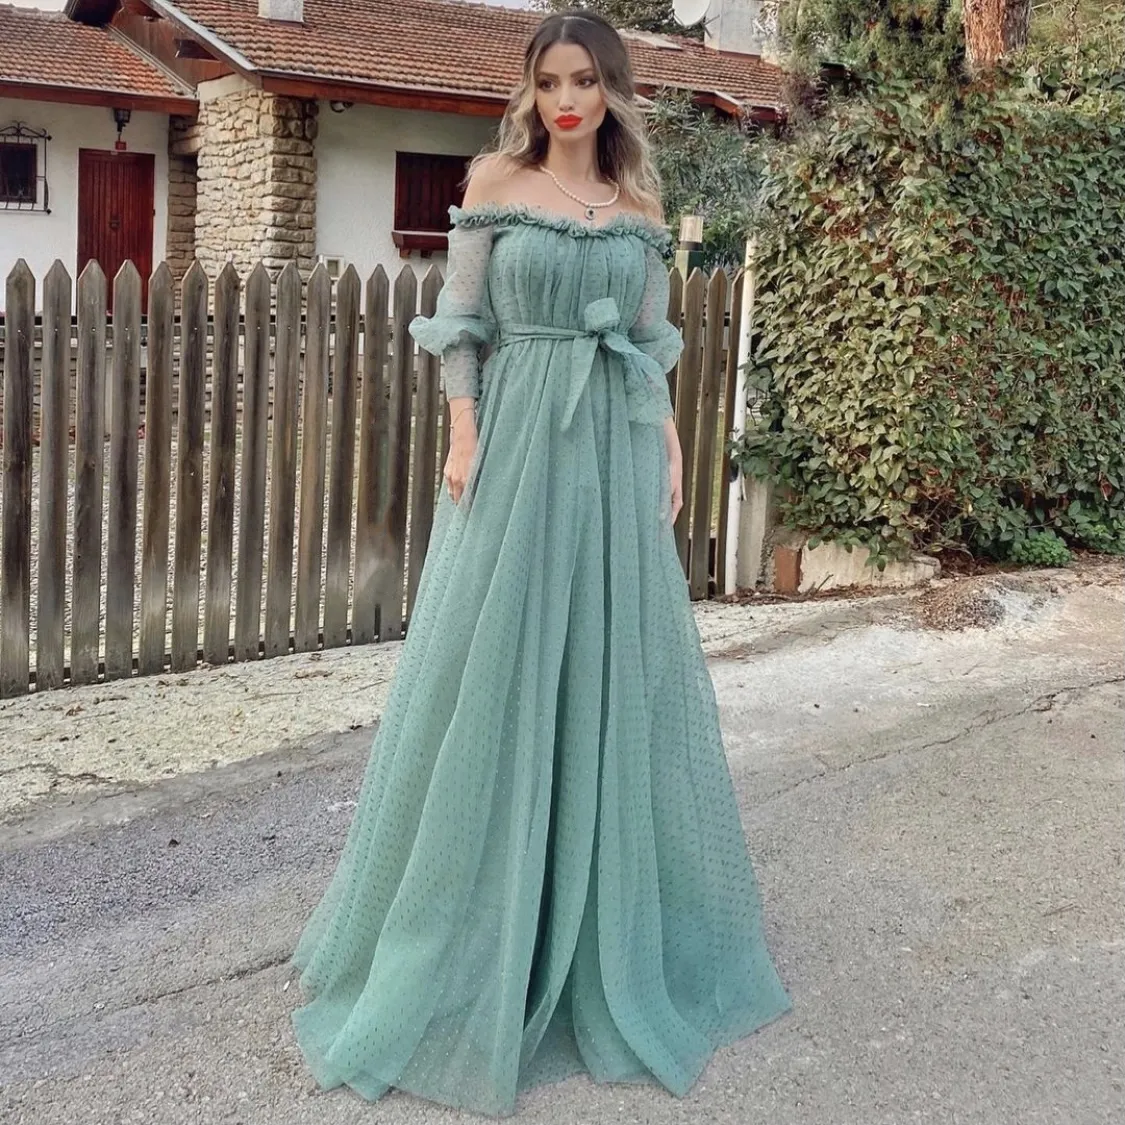 Turquoise Polka Dot Prom Dresses A Line Bateau Neck Off Shoulder Long Sleeve Bow Ruffles Tulle Backless Floor Length Evening Gowns